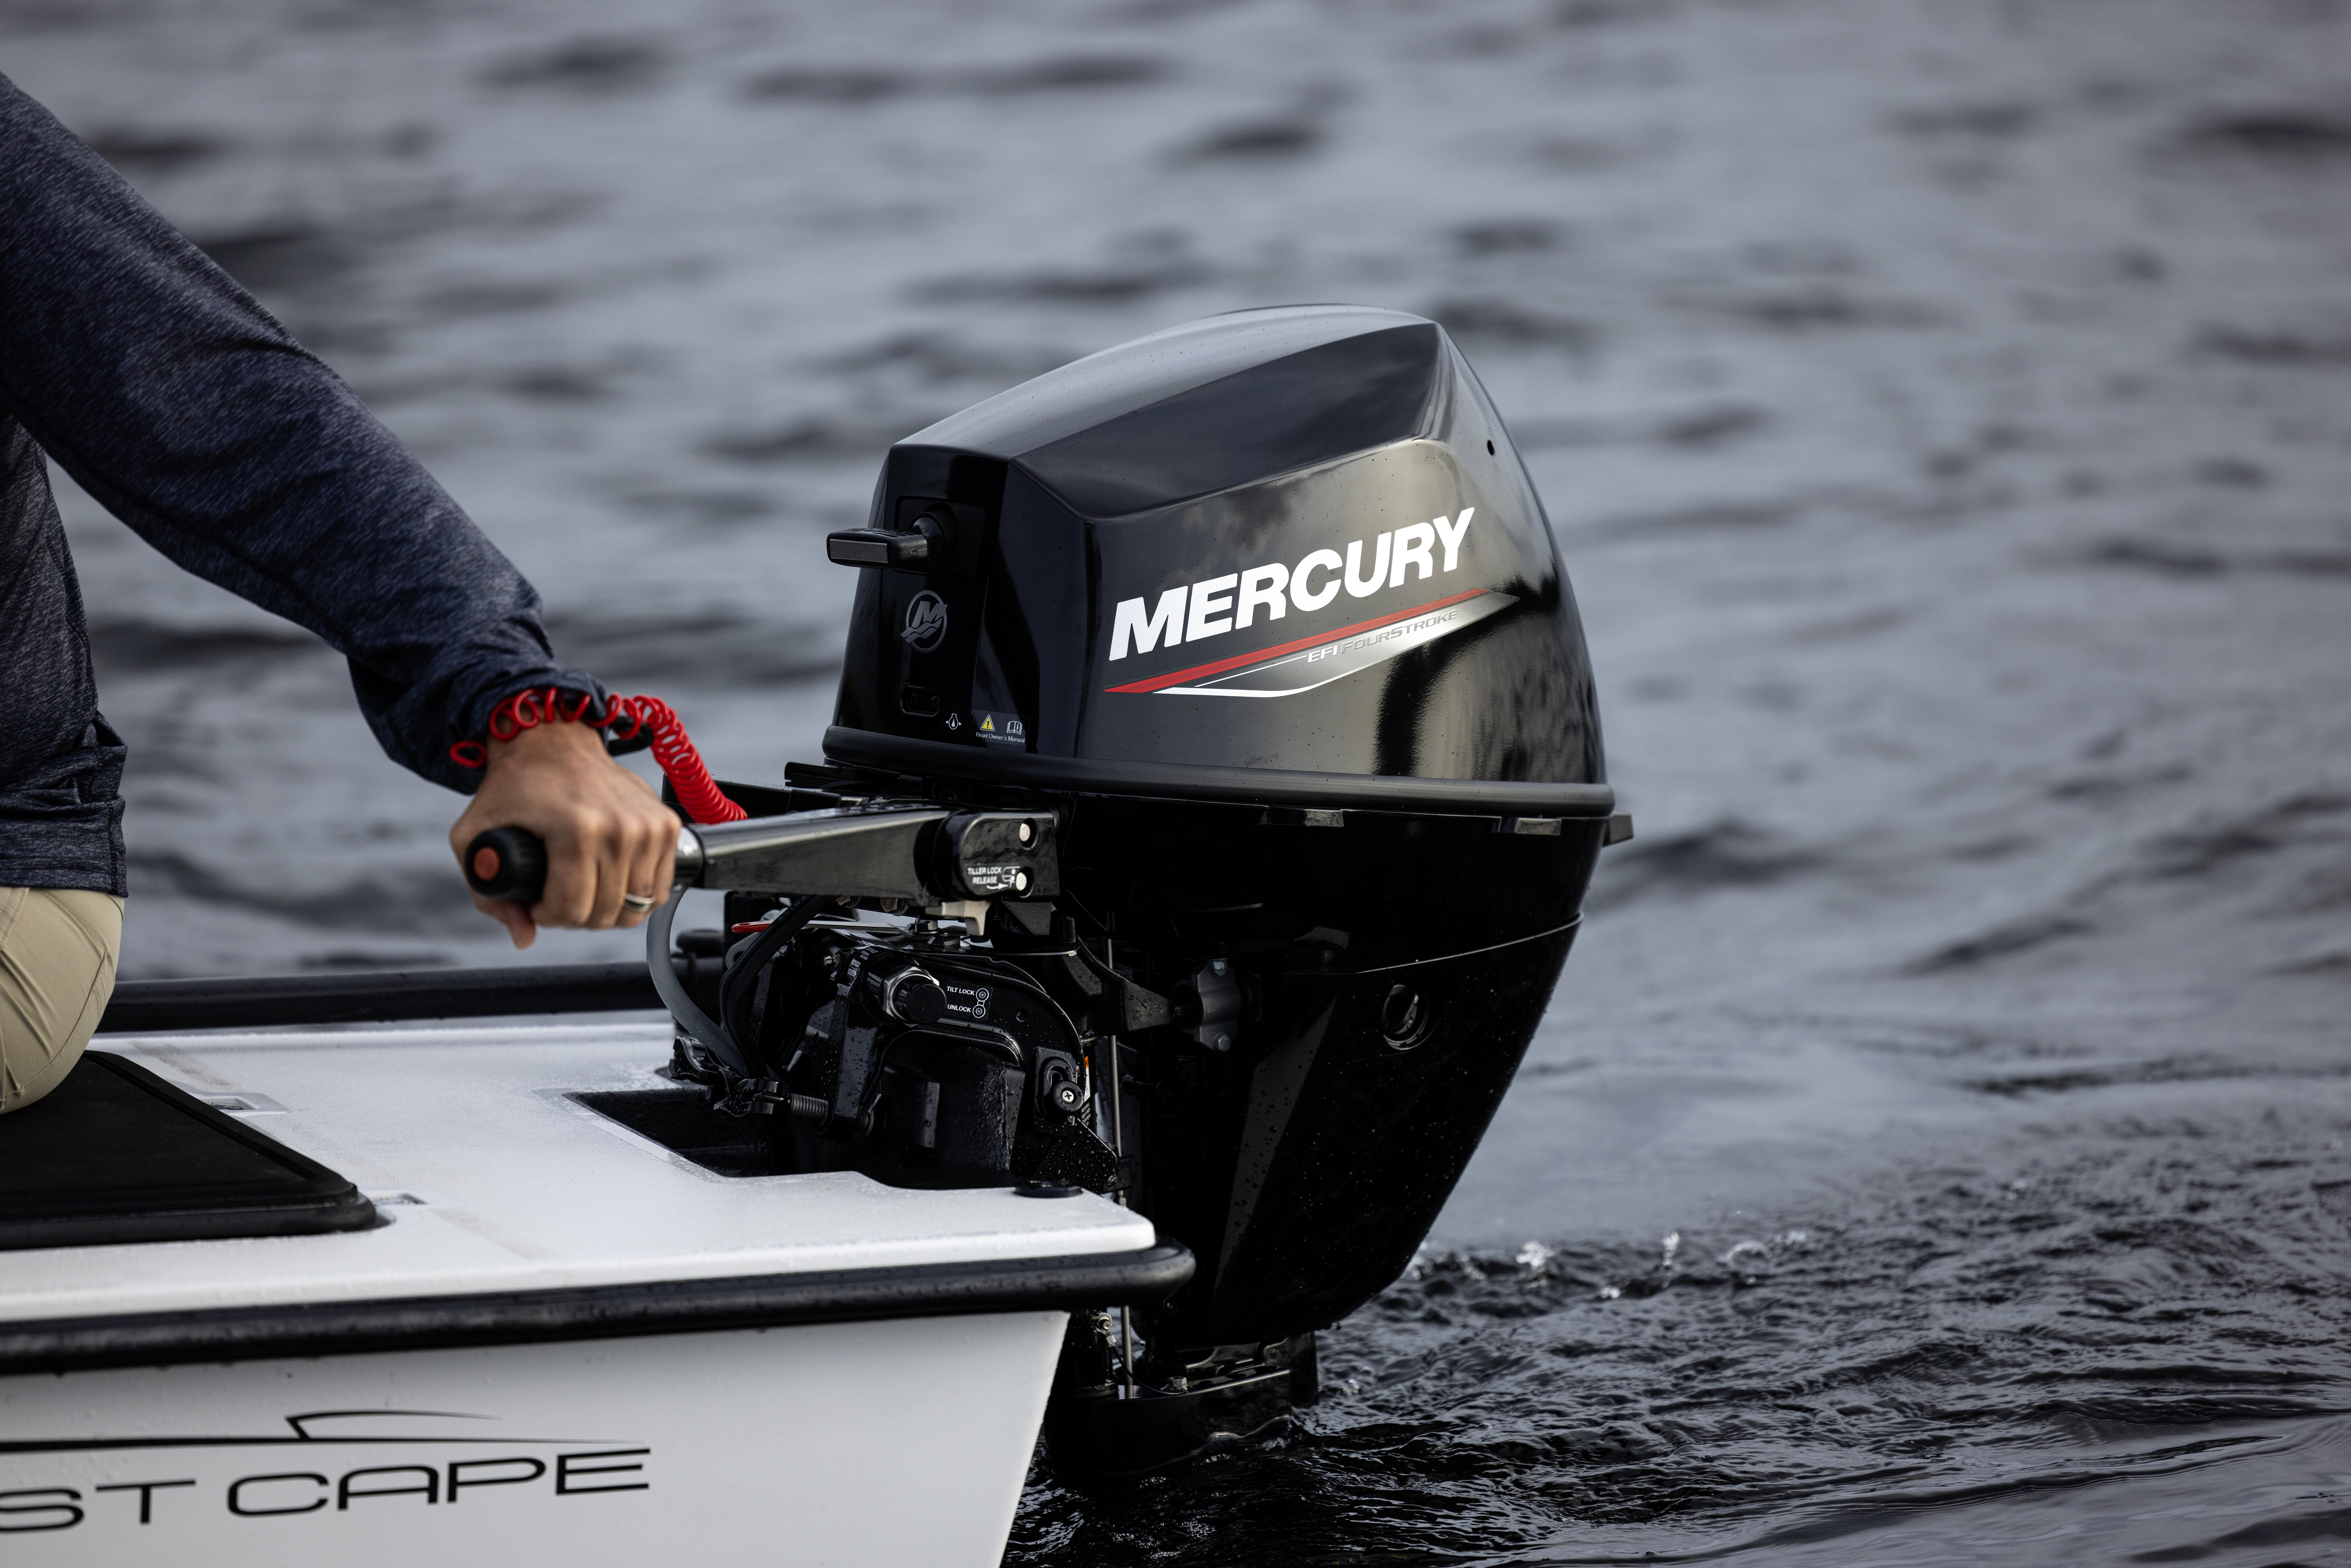 MERCURY MARINE INTRODUCES 8HP AND 9.9HP EFI FOURSTROKE AND 9.9HP EFI PROKICKER OUTBOARDS